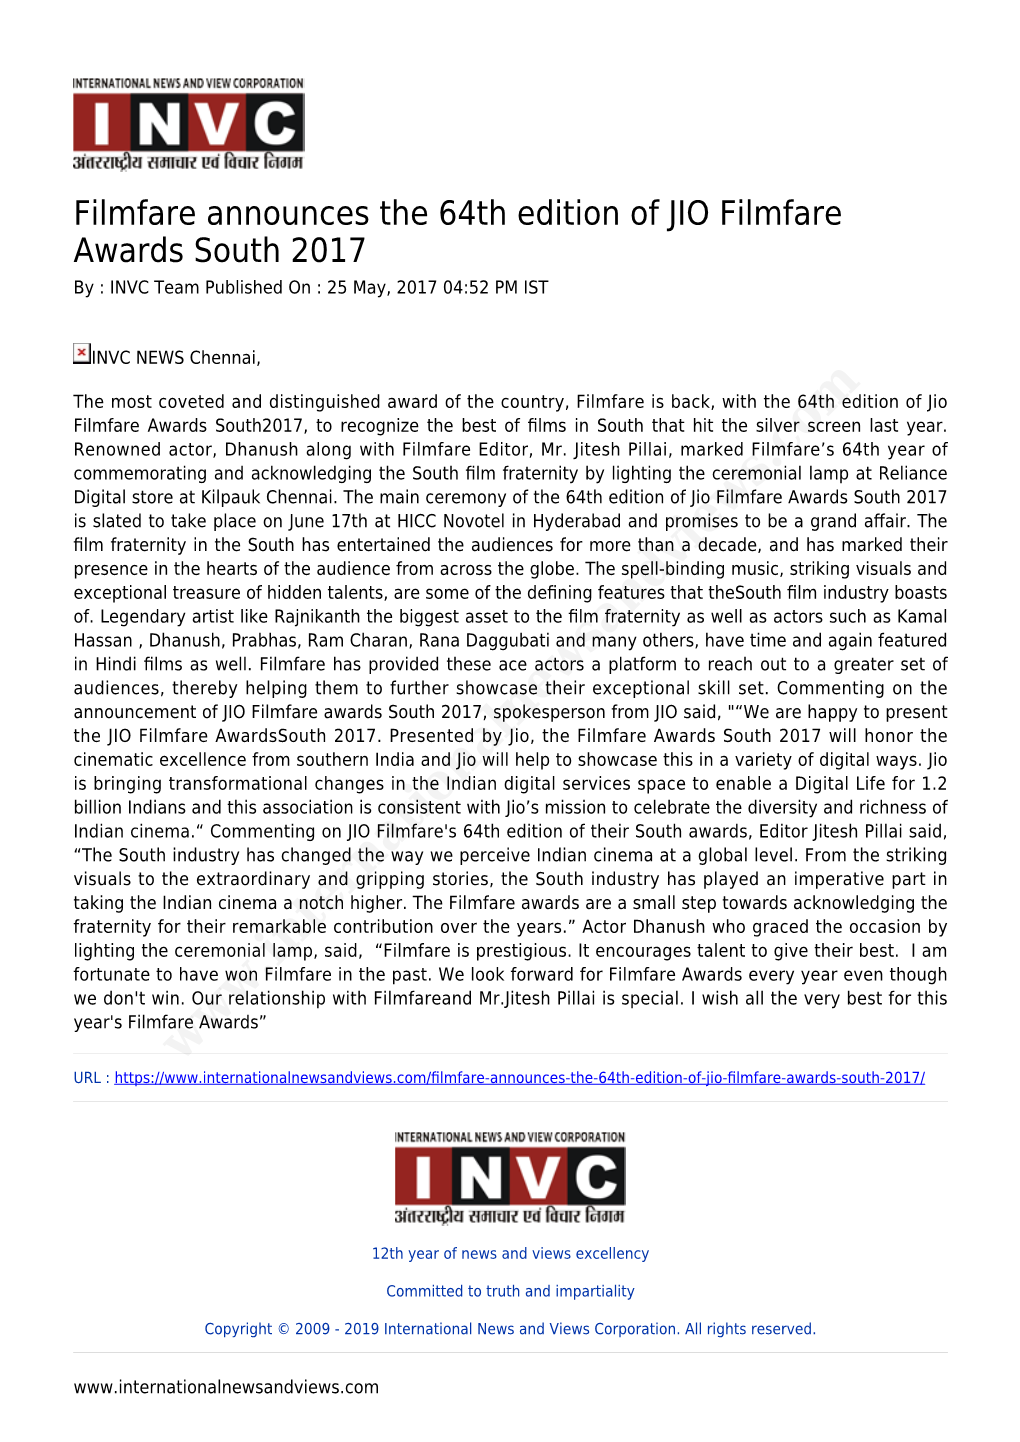 Filmfare Announces the 64Th Edition of JIO Filmfare Awards South 2017 by : INVC Team Published on : 25 May, 2017 04:52 PM IST